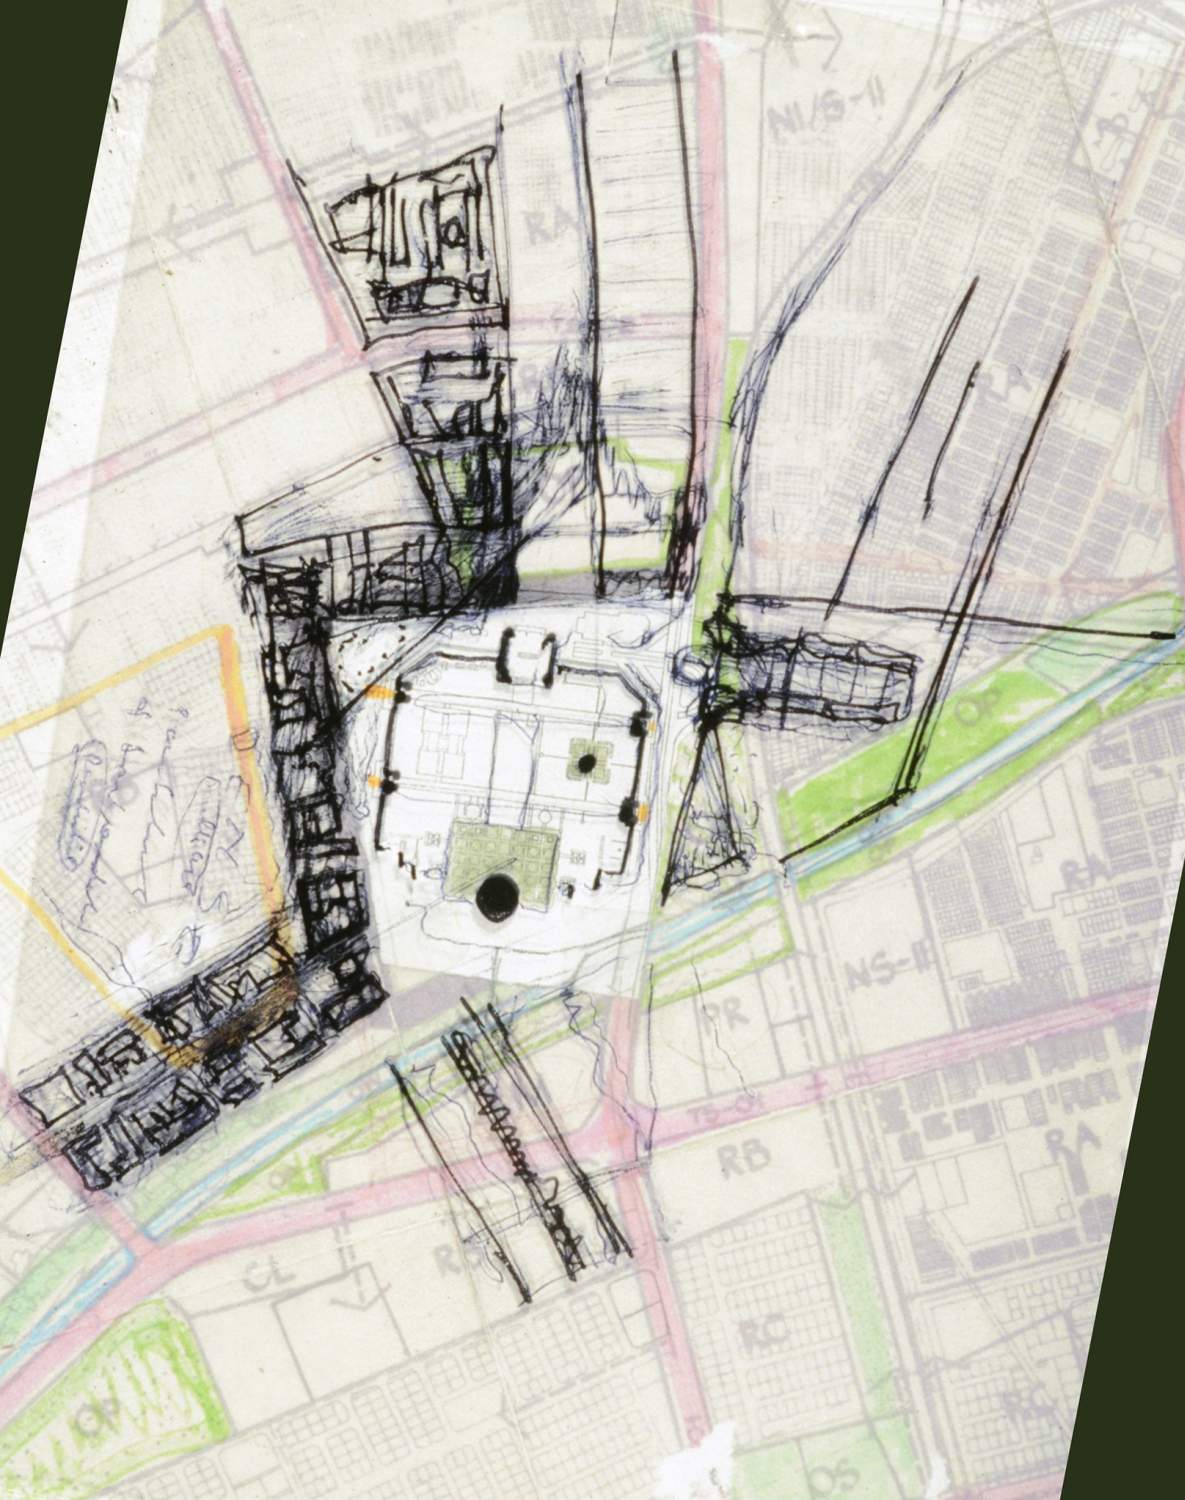 Site plan sketch on translucent ground, over intended location showing mosque on map of Baghdad neighborhood.